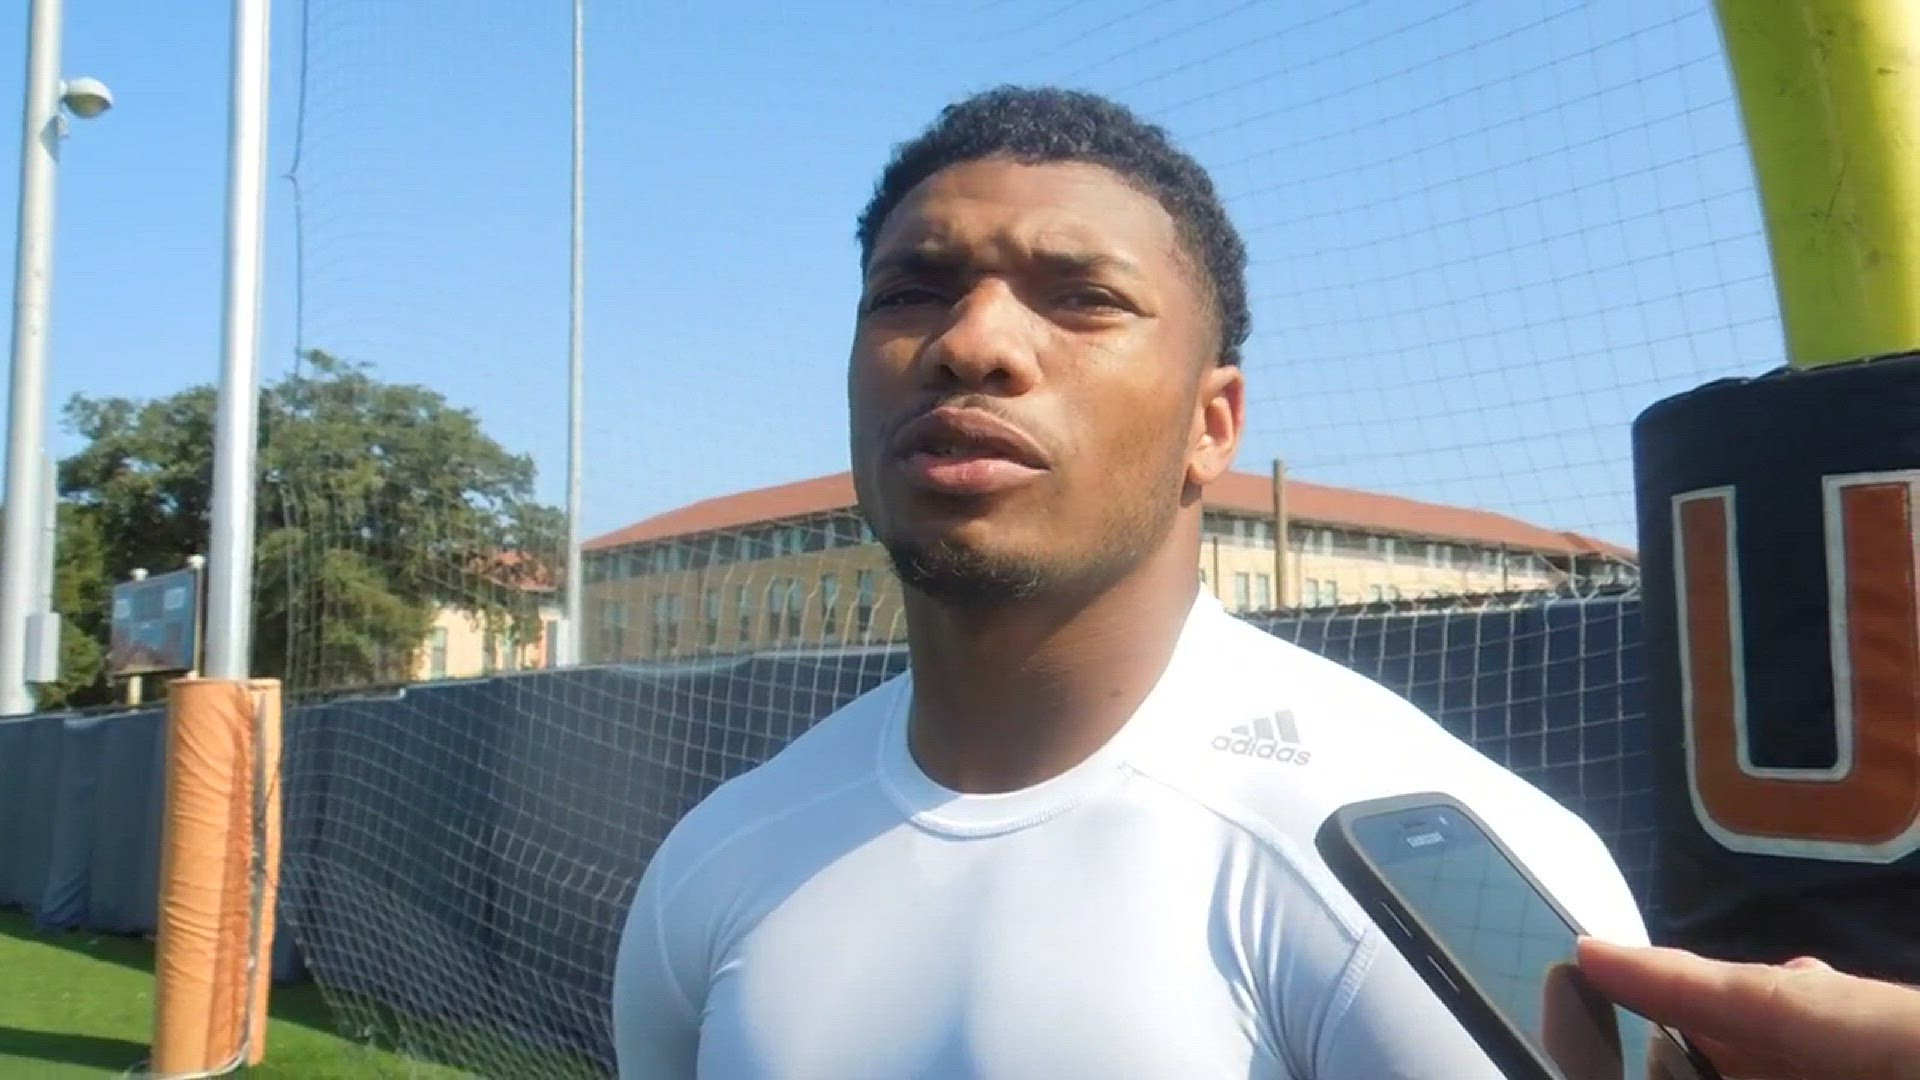 UTSA cornerback Devron Davis on what the team learned from loss to Southern Miss